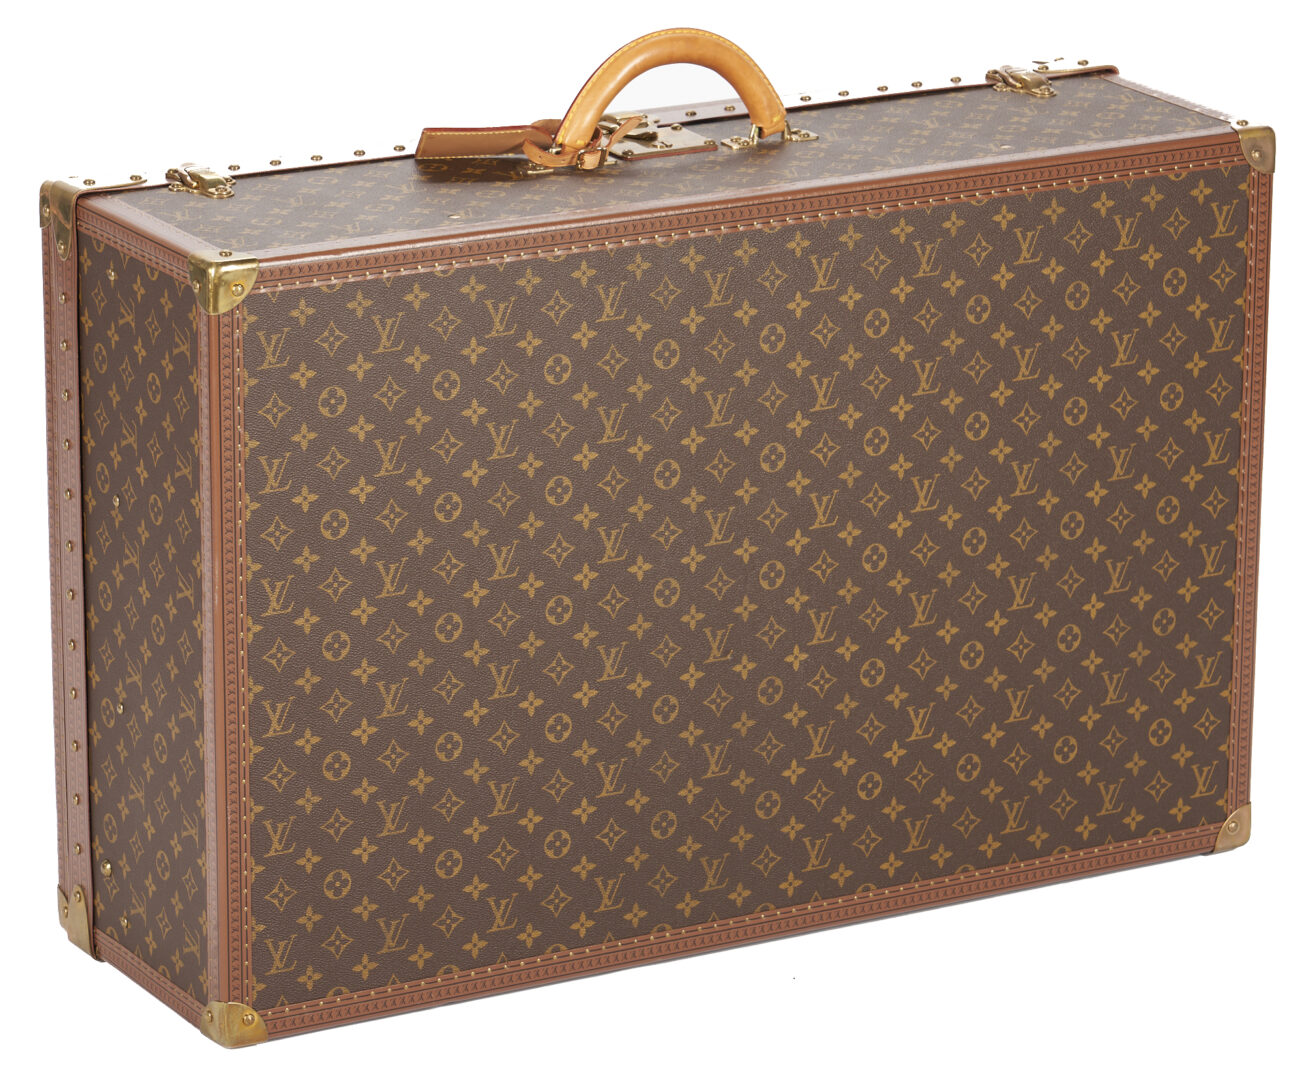 Lot 767: Louis Vuitton Hard Sided Suitcase, Alzer 80